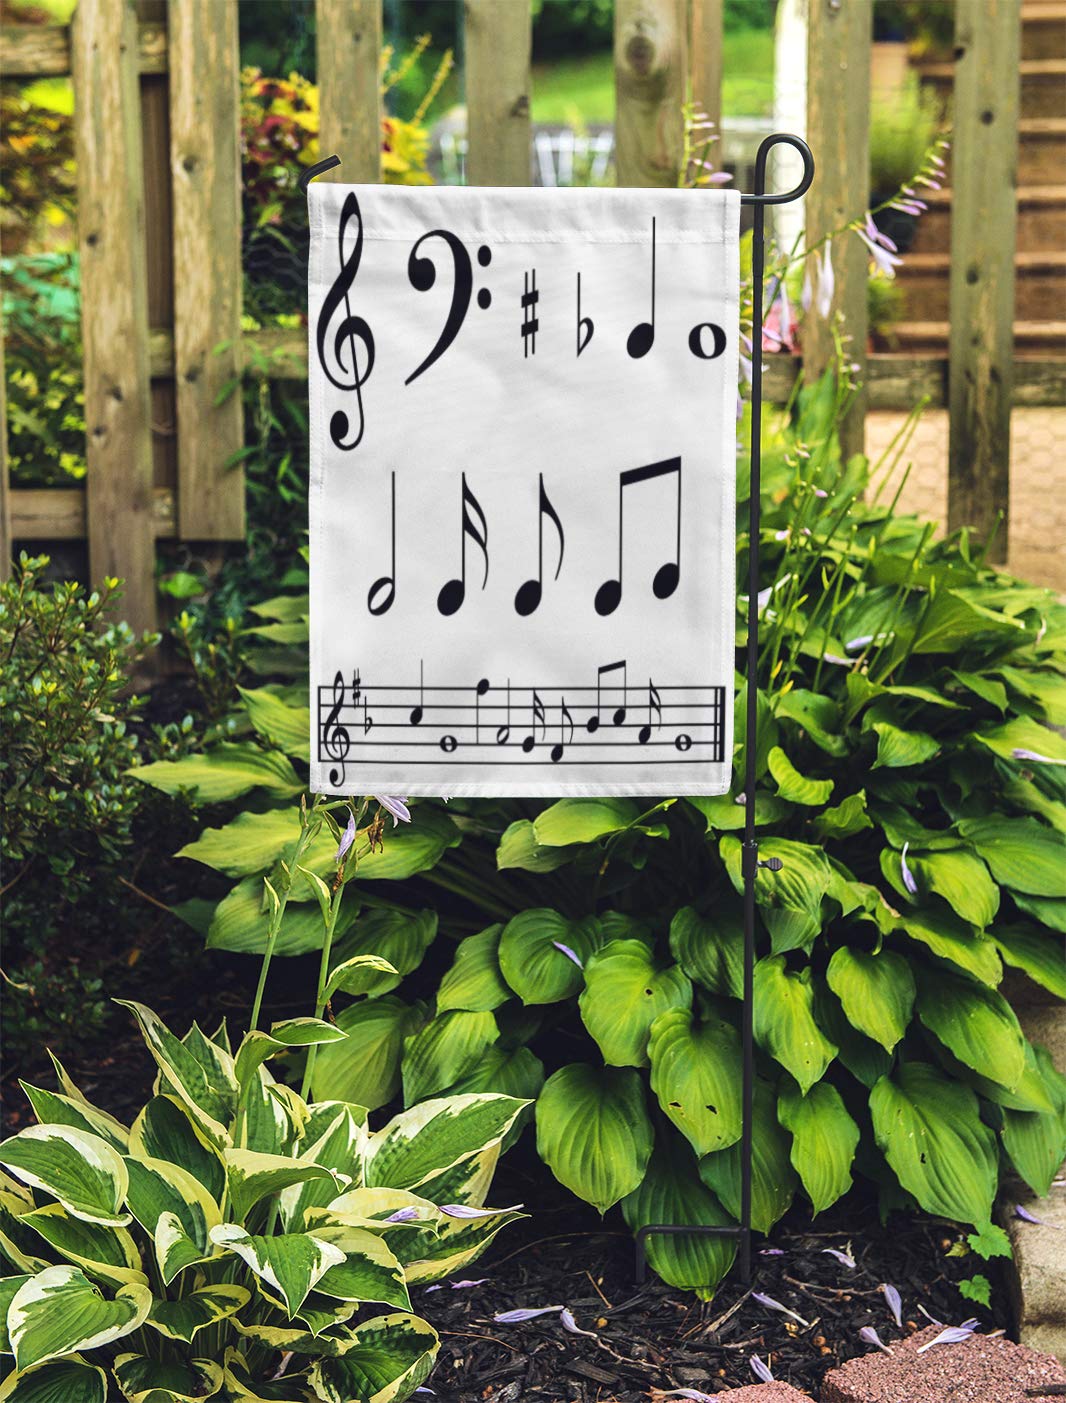 KDAGR Clef Music Notes and Symbols Bar Treble Score Bass Whole Garden Flag Decorative Flag House Banner 28x40 inch - image 2 of 2